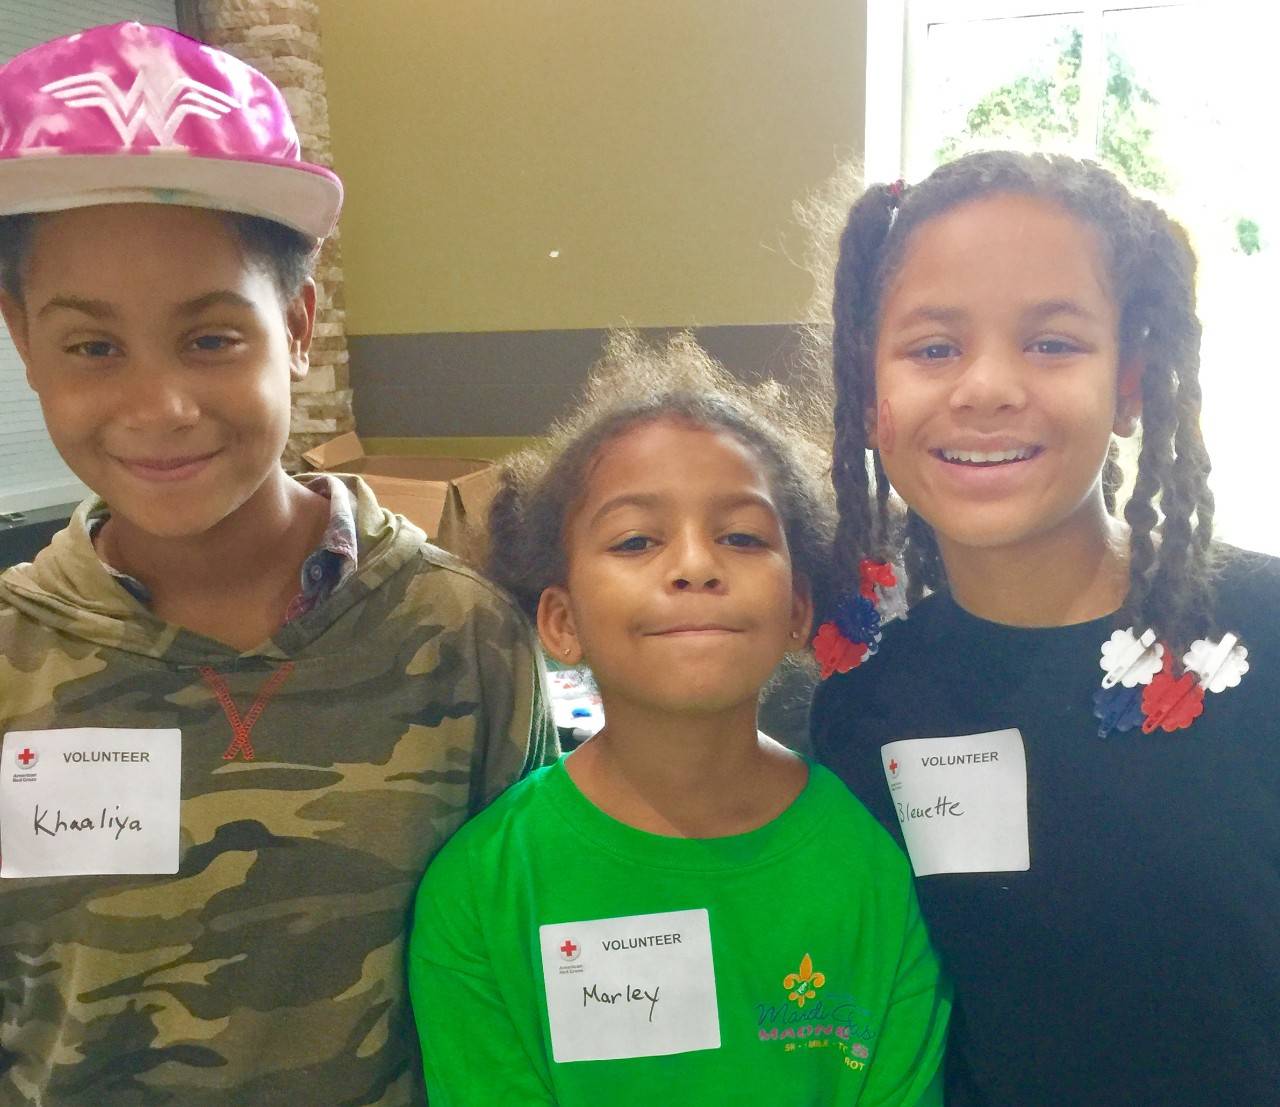 "Wonder girls":  (L-R) Sisters Khaaliya Freire, 12, Marley Hypolitte, 9, and Bleuette Hypolitte, 11, were energetic Red Cross volunteers at the largest population evacuation center in Georgia during Irma. After father Mitchell Robinson started volunteering, the sisters wanted in and picked up trash and worked at the snack table at the Columbus (GA) Civic Center, which hosted nearly 600 residents.  Center manager Heidi Bassano called them her "wonder girls."